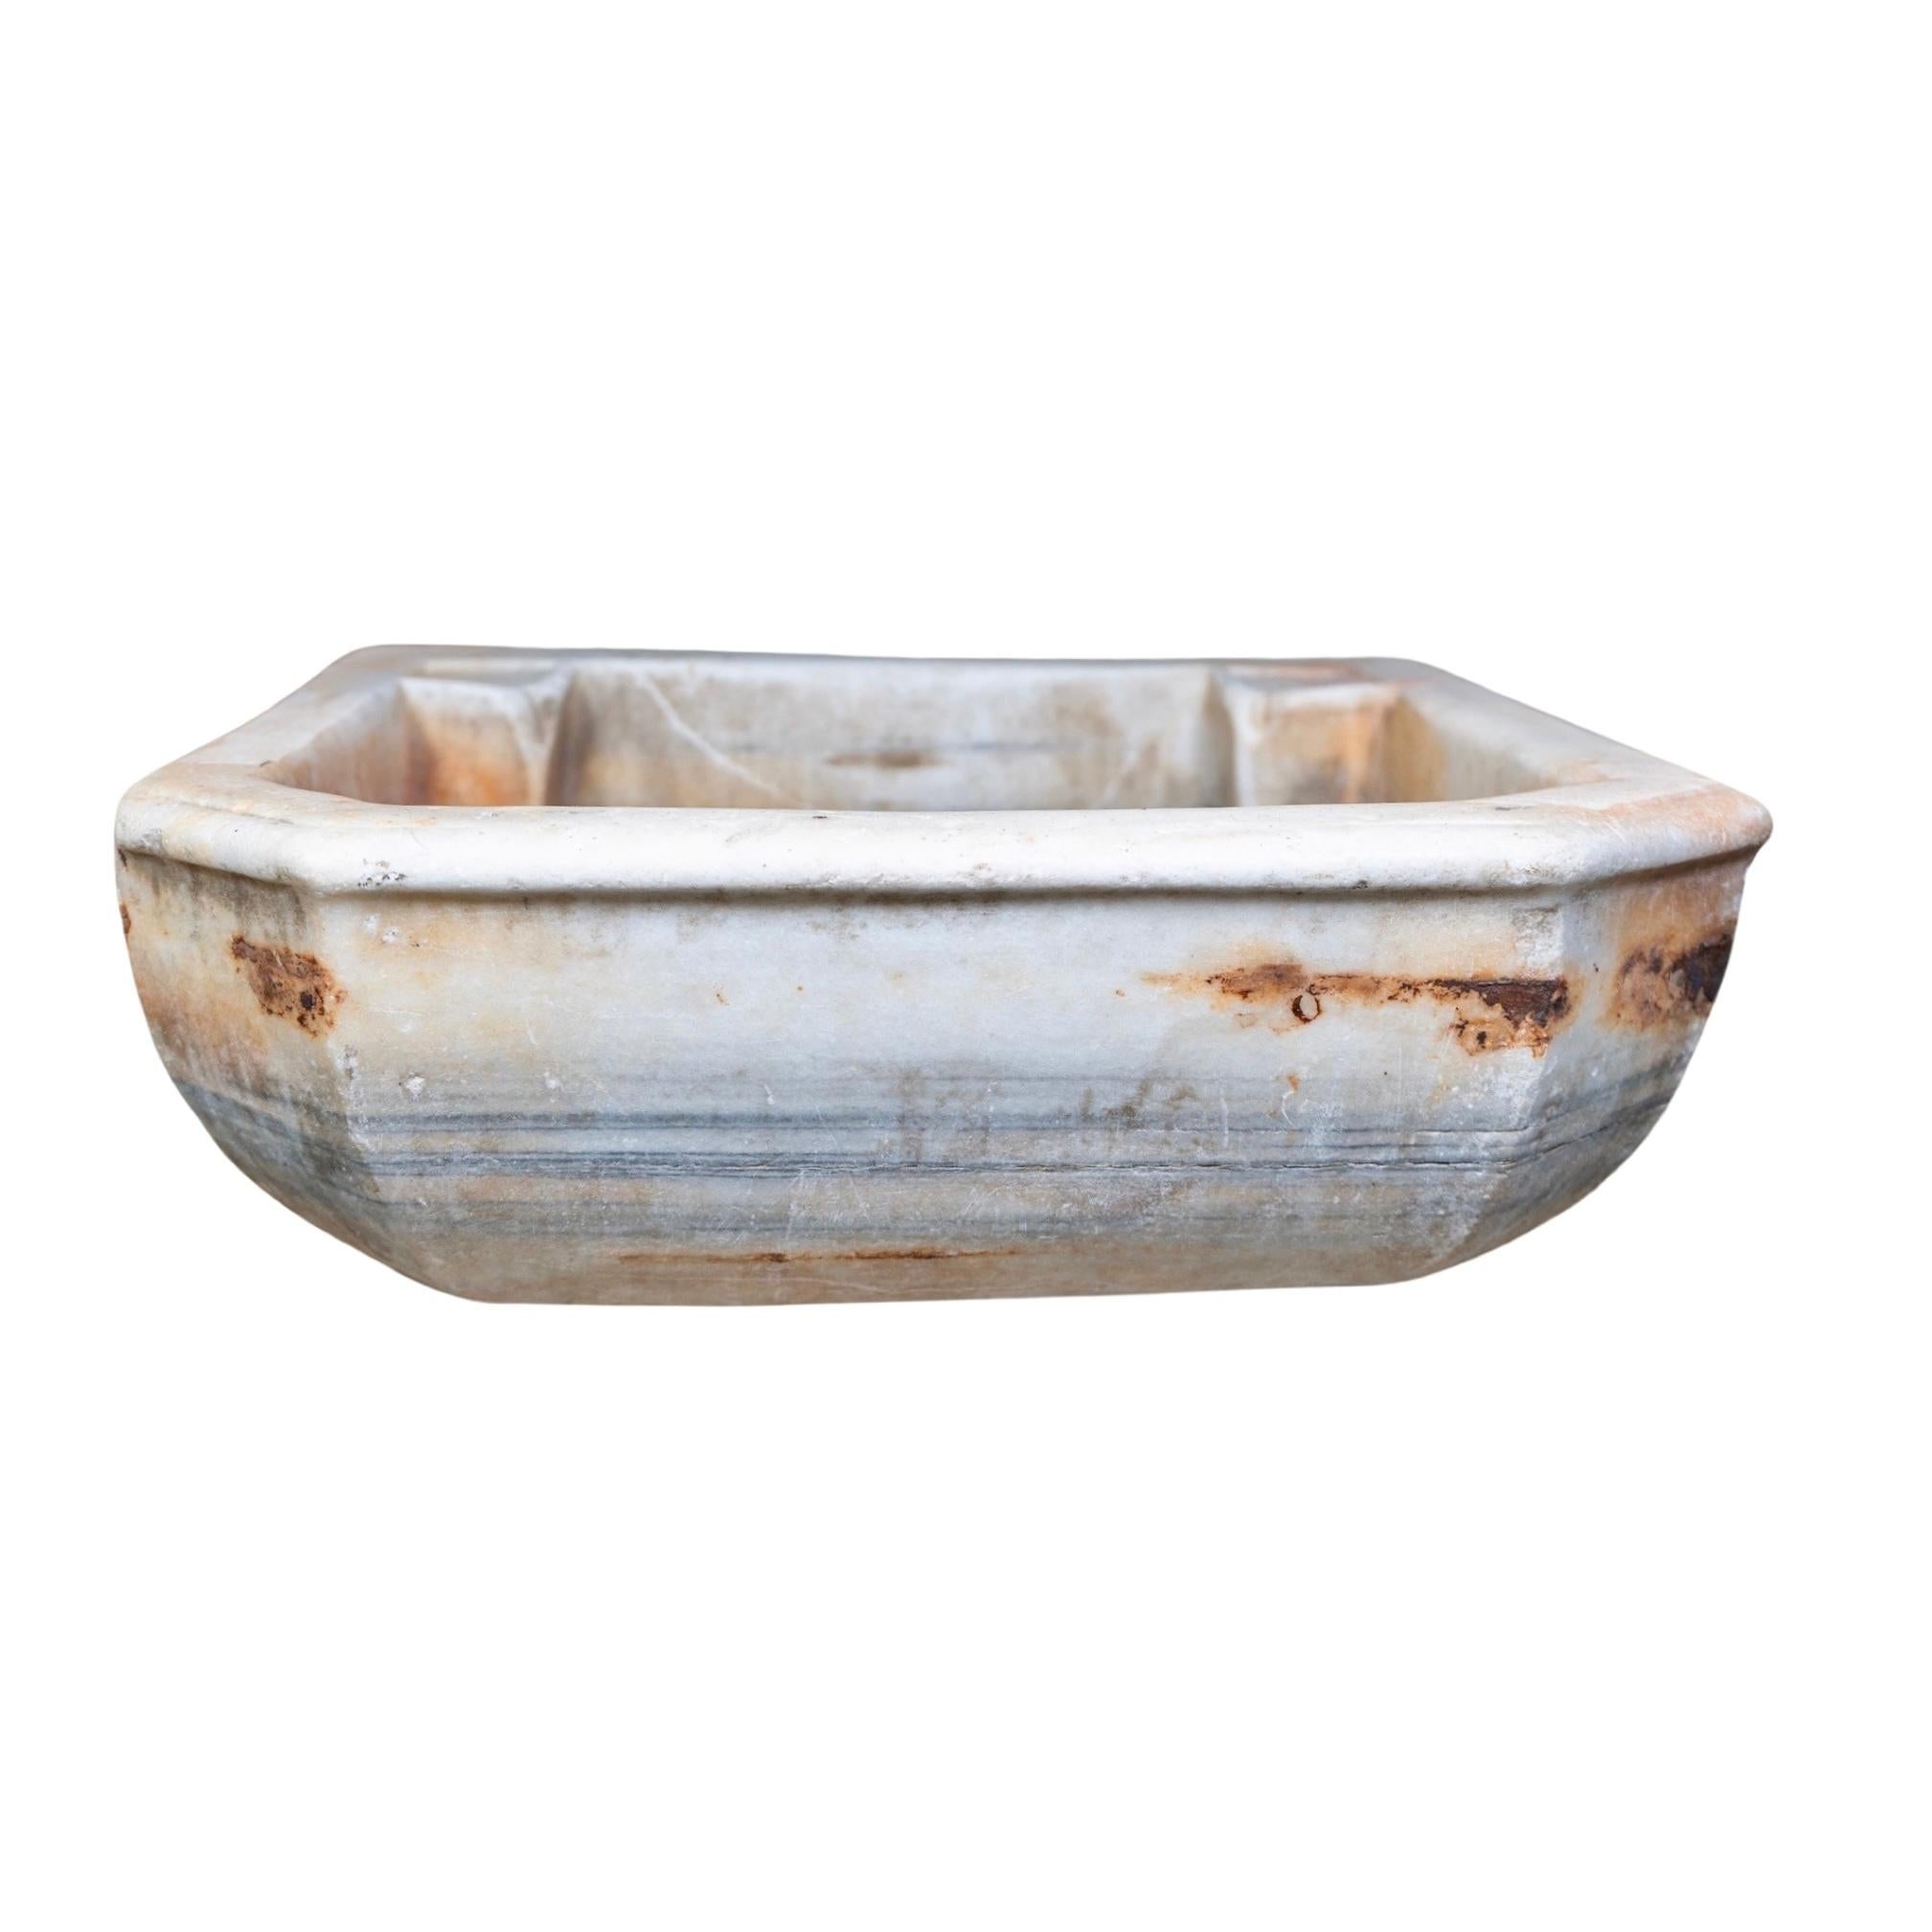 This French white marble sink is an 18th century construction from France using natural marble, offering superior quality and lasting durability. Its unique aesthetic and elegant design make it an ideal upgrade for modern kitchens. Its timeless